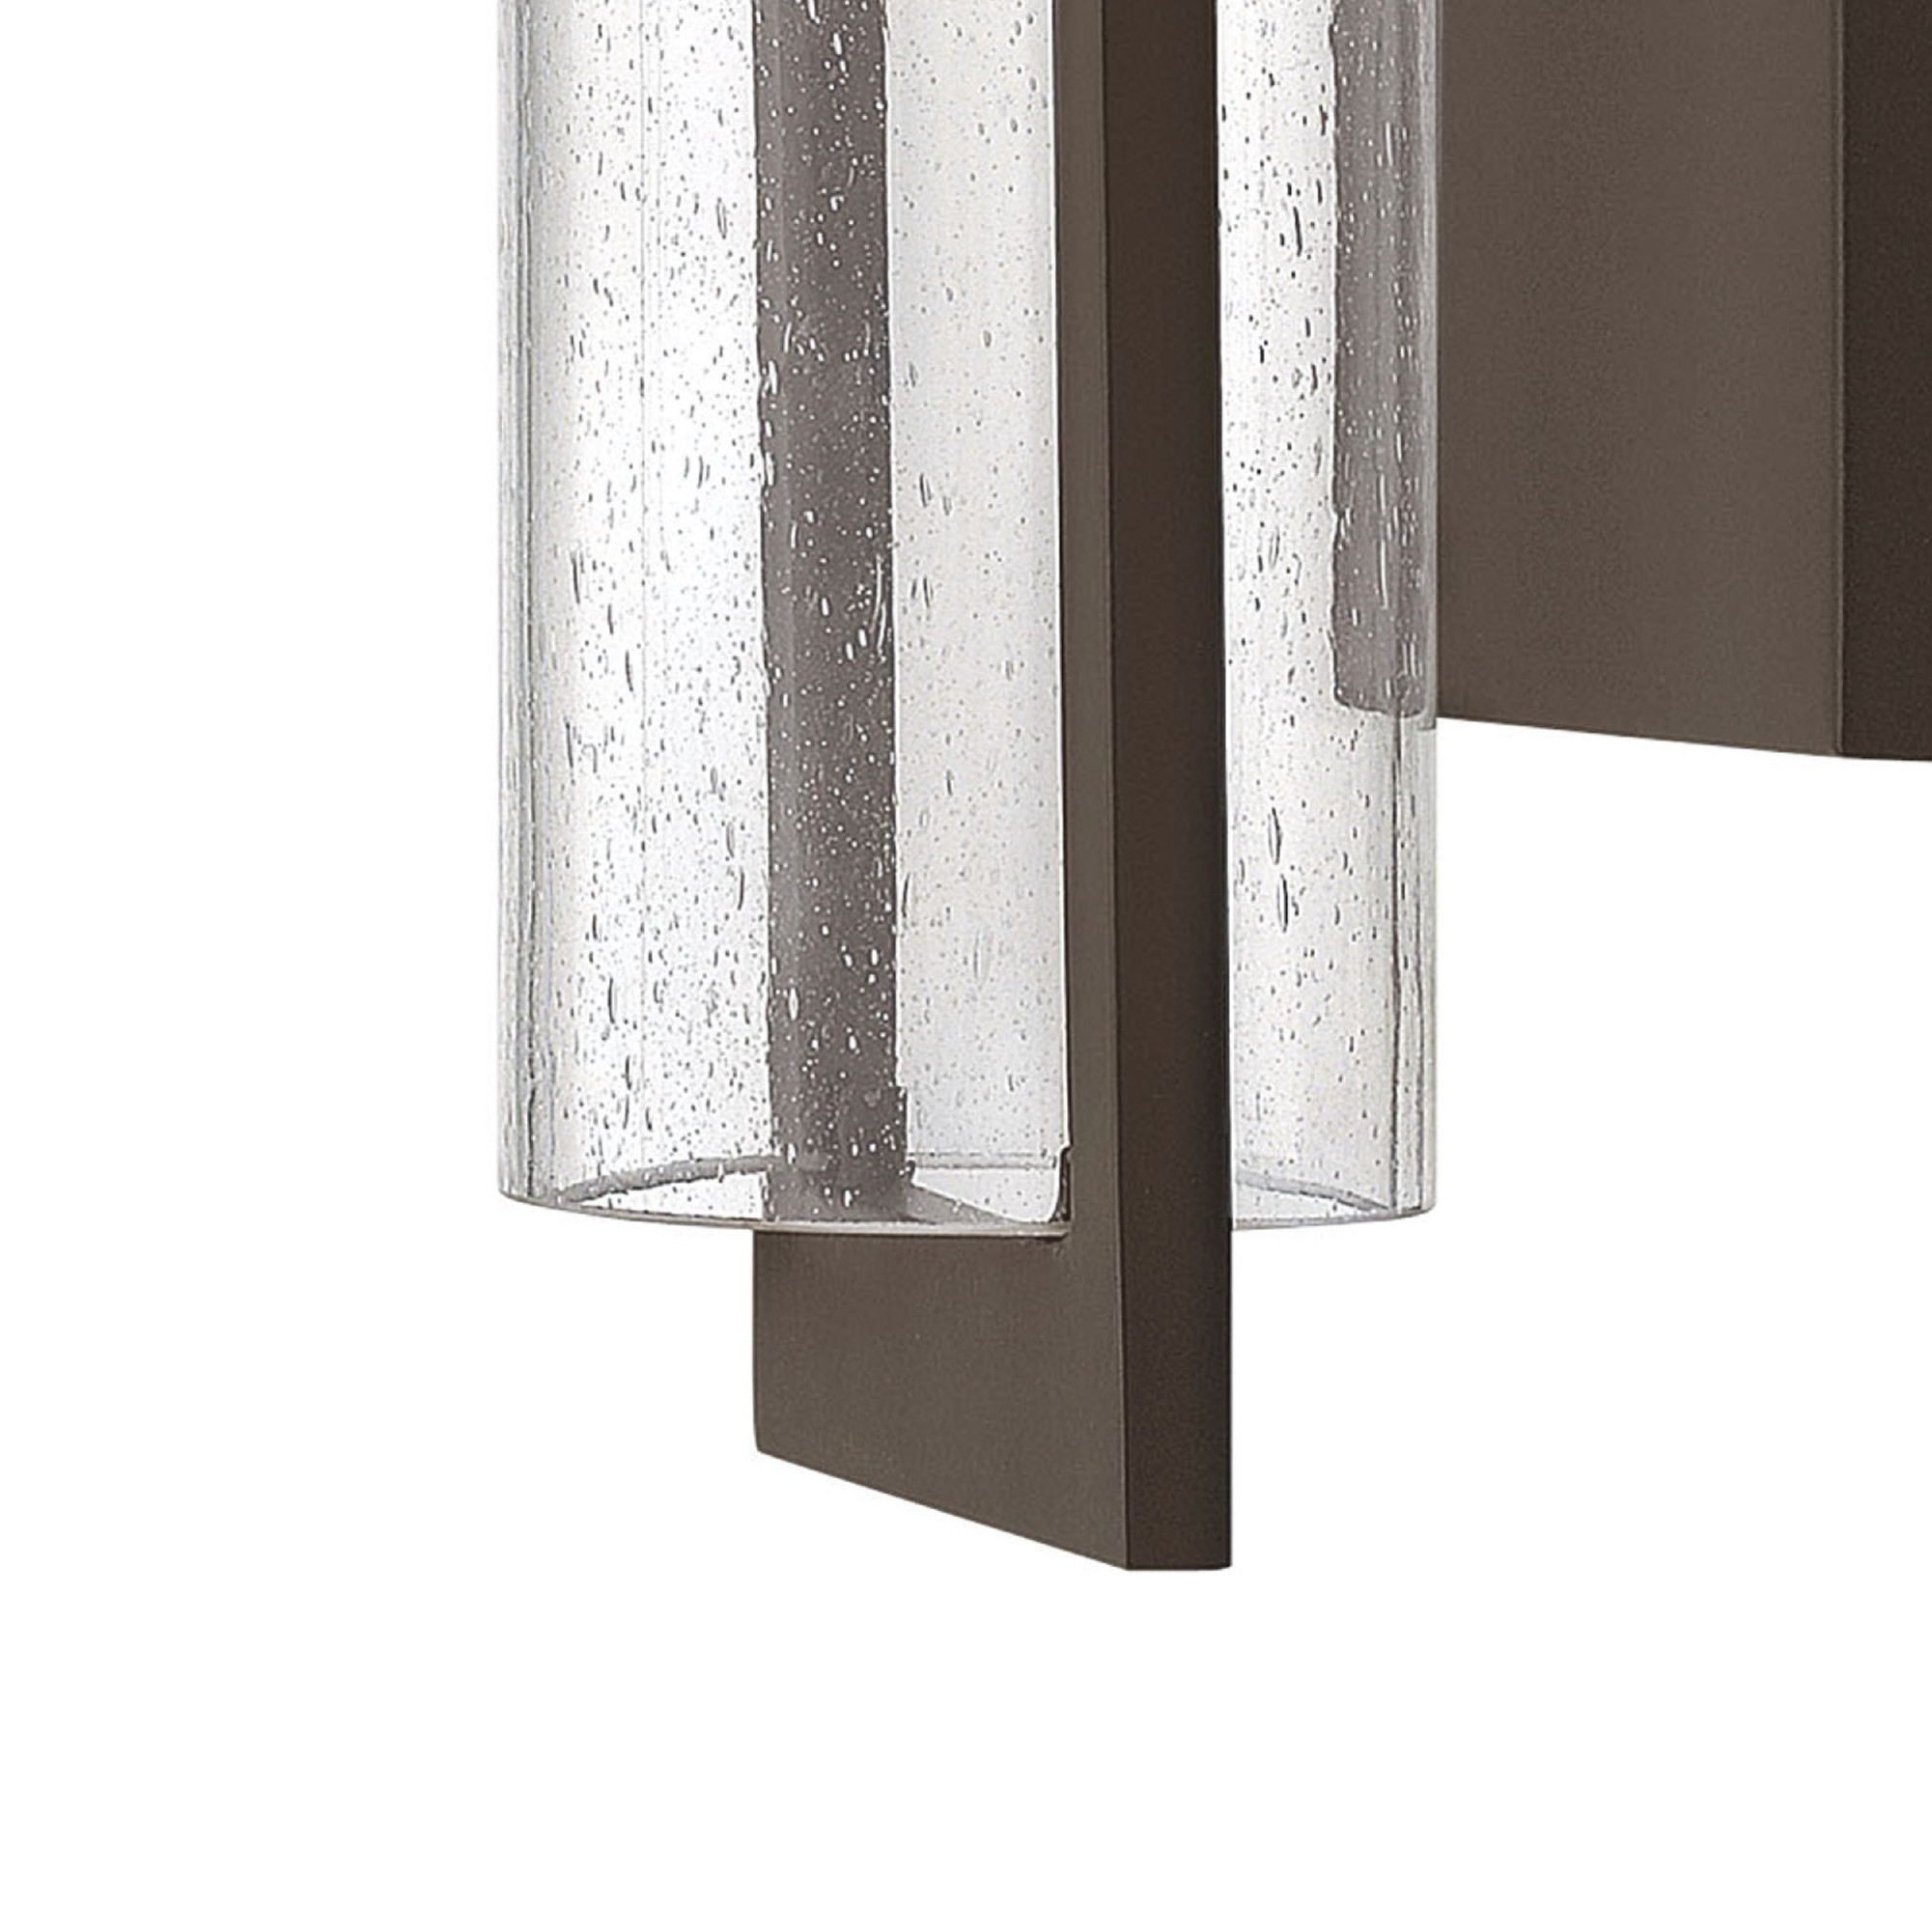 Hinkley Lighting 1324-Led Shelter 20.5" Tall Dark Sky Integrated Led Outdoor Wall Sconce - - image 3 of 7